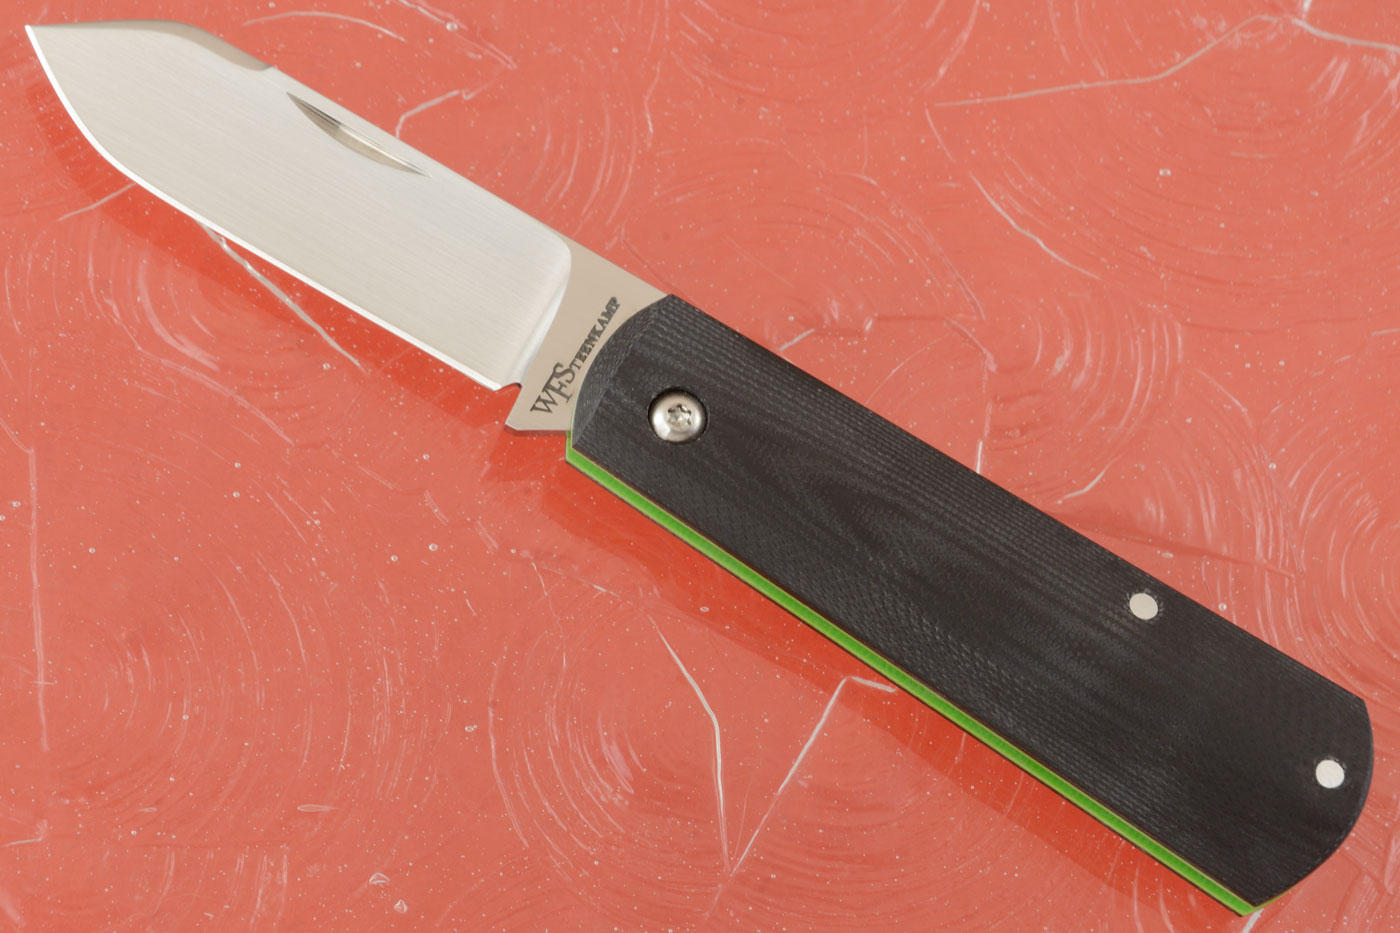 Barlow Friction Folder with Black and Lime Green G10